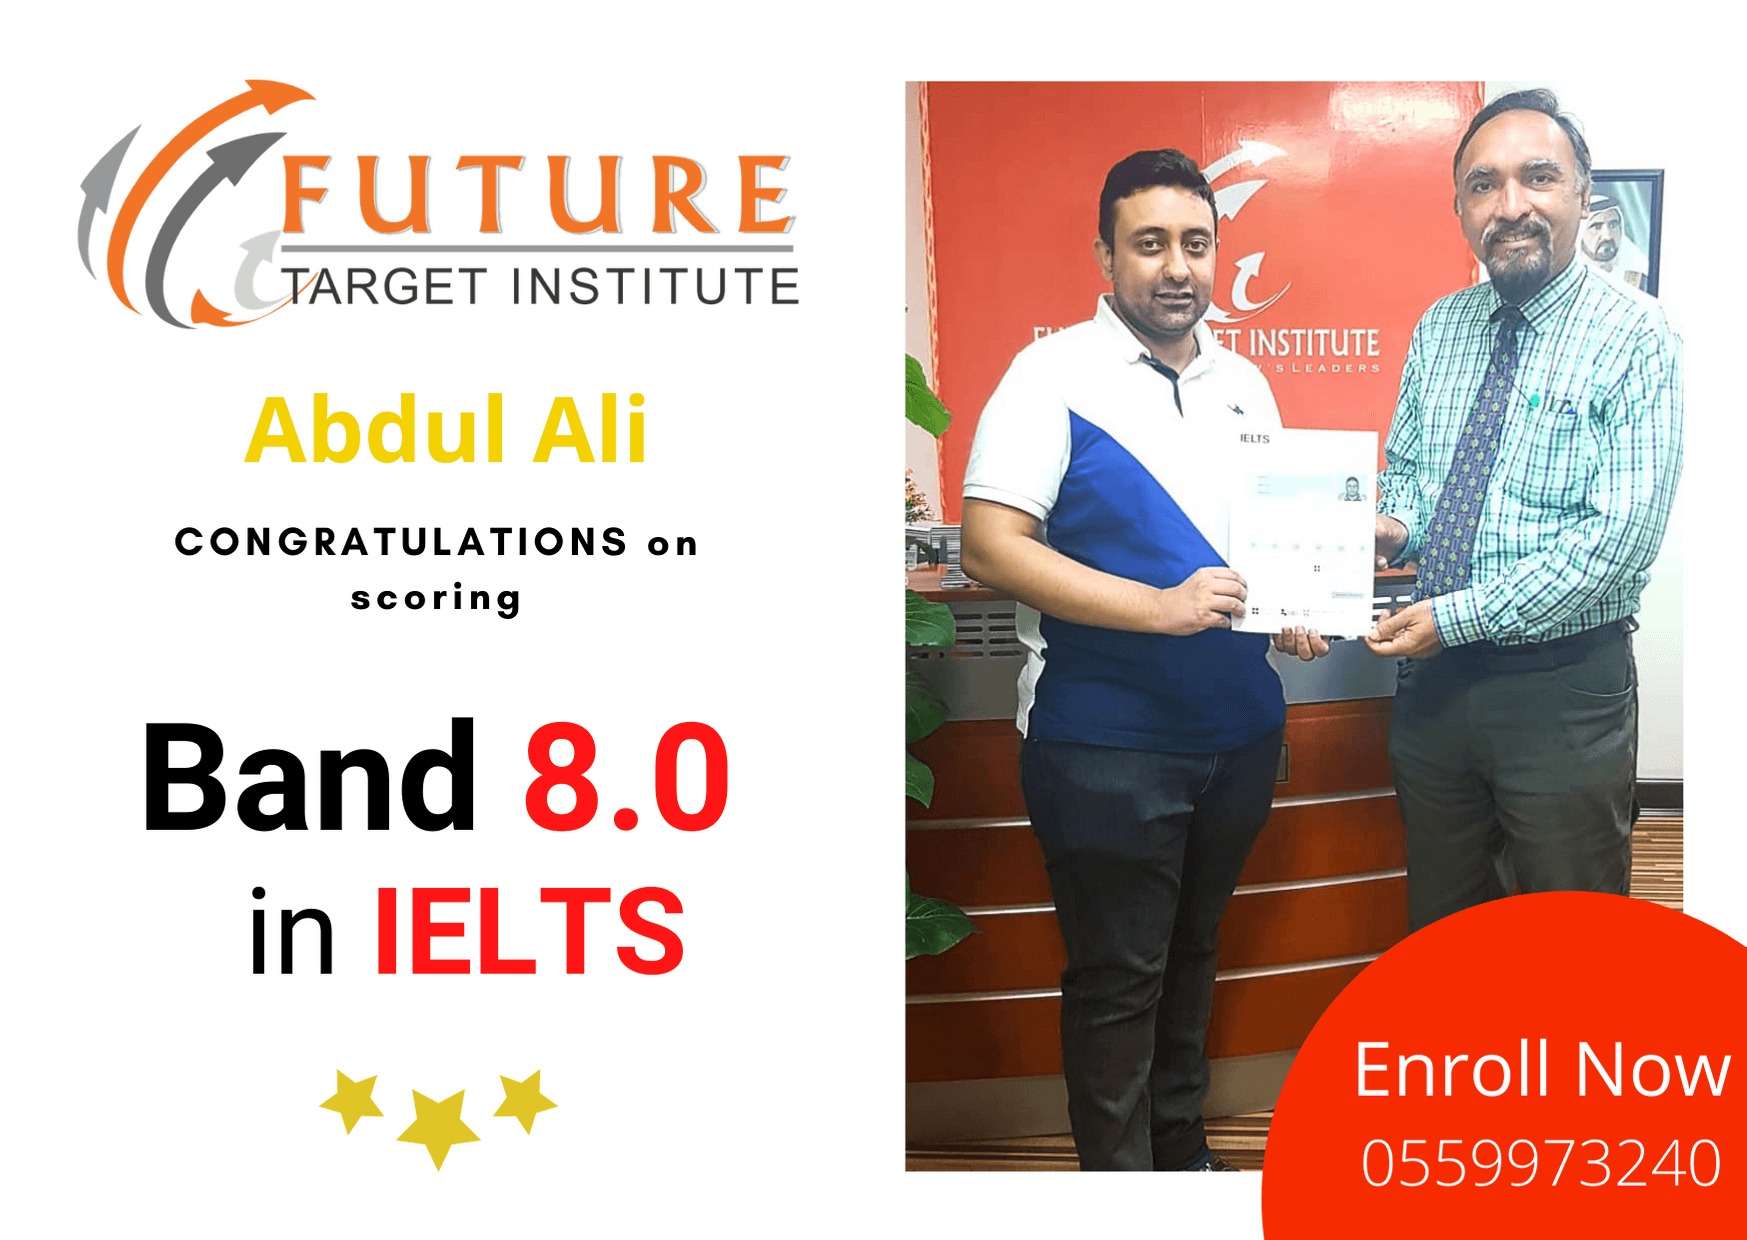 Looking for an IELTS Mentor? Our IELTS Classes in Dubai will help you find your buddy and get the score you need for Canada Immigration.